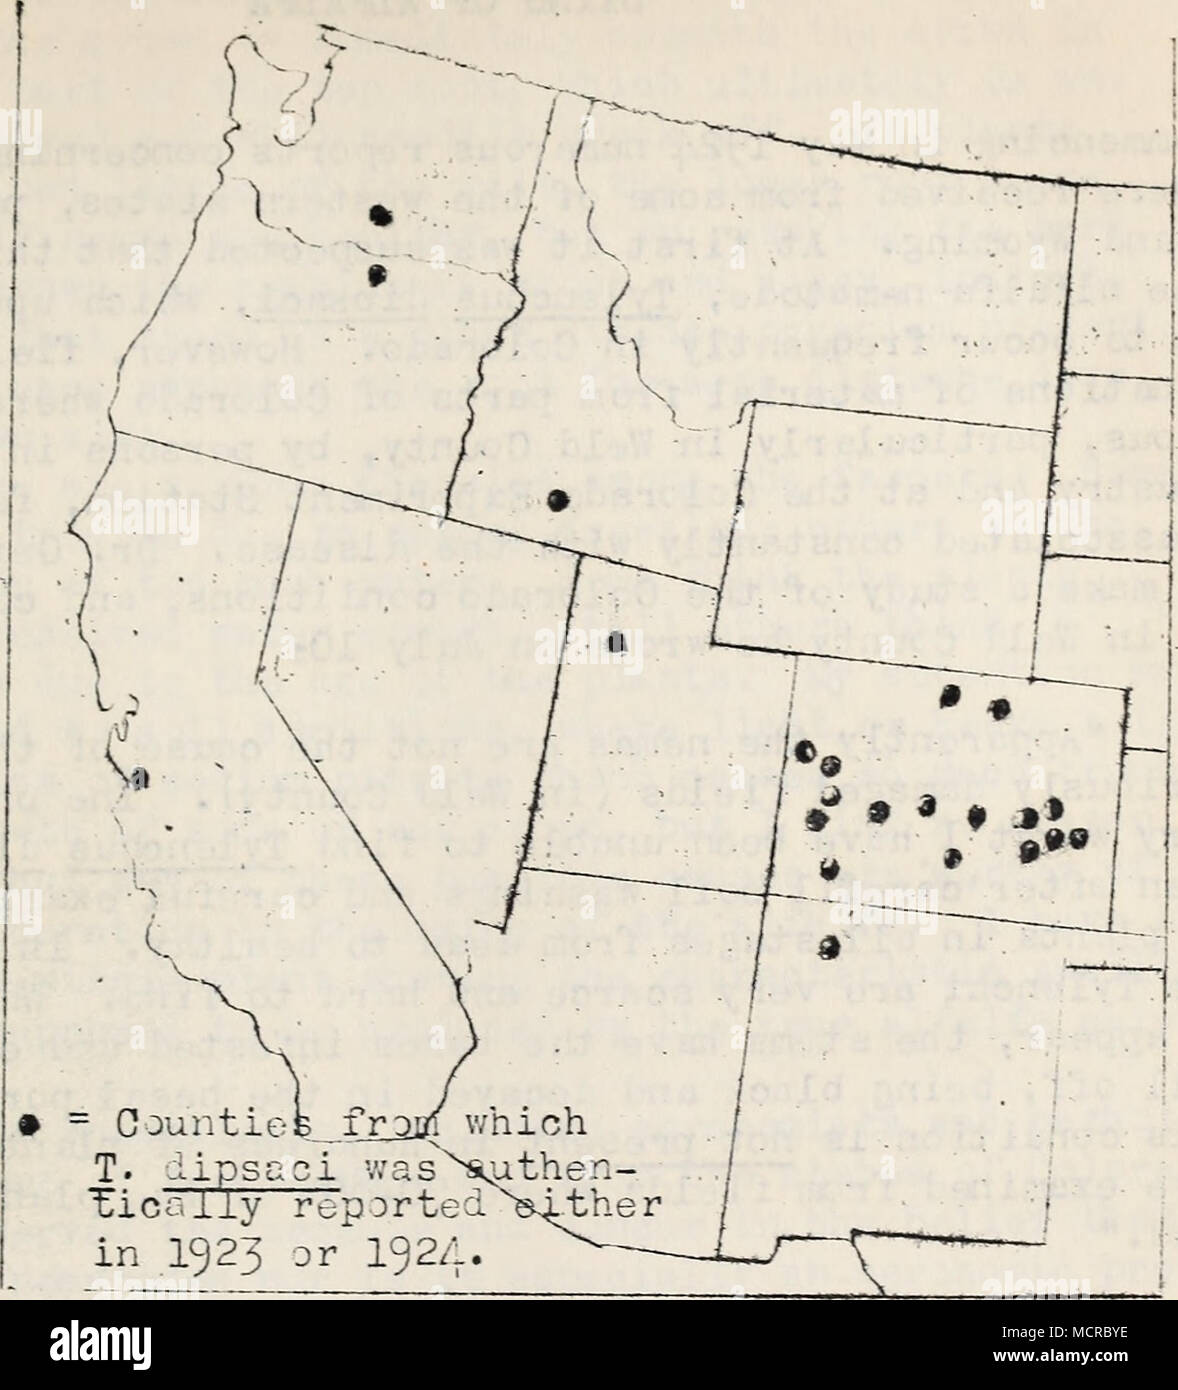 . Fig. 3. Present .known distribution of the alfalfa nematode, Tylenchus dipsaci, according to records of the Plant Disease Survey. Recent literature; Godfrey, G. H., and M. B. McKay. The stem nematode Tylenchus dipsaci on v/ild hosts in the Northw-.-st. U. S. Dept. Agr. Bui. 1225): 1-9. Mar. 1924. Dissemination of the stem and bulb infesting com- .posites. Jour.- i^gr. Res. 28: 473-478. 1-3- May 3, 1924. BACTERIAL ELIGHT CAUSED BY' BACT^RIbl-r Mt^DICAGINIS (SACK.) EPS. Bacterial blight v/as reported as occurring in Uobraska, Idaho, and Washington, but did practically no damage. It is interest Stock Photo